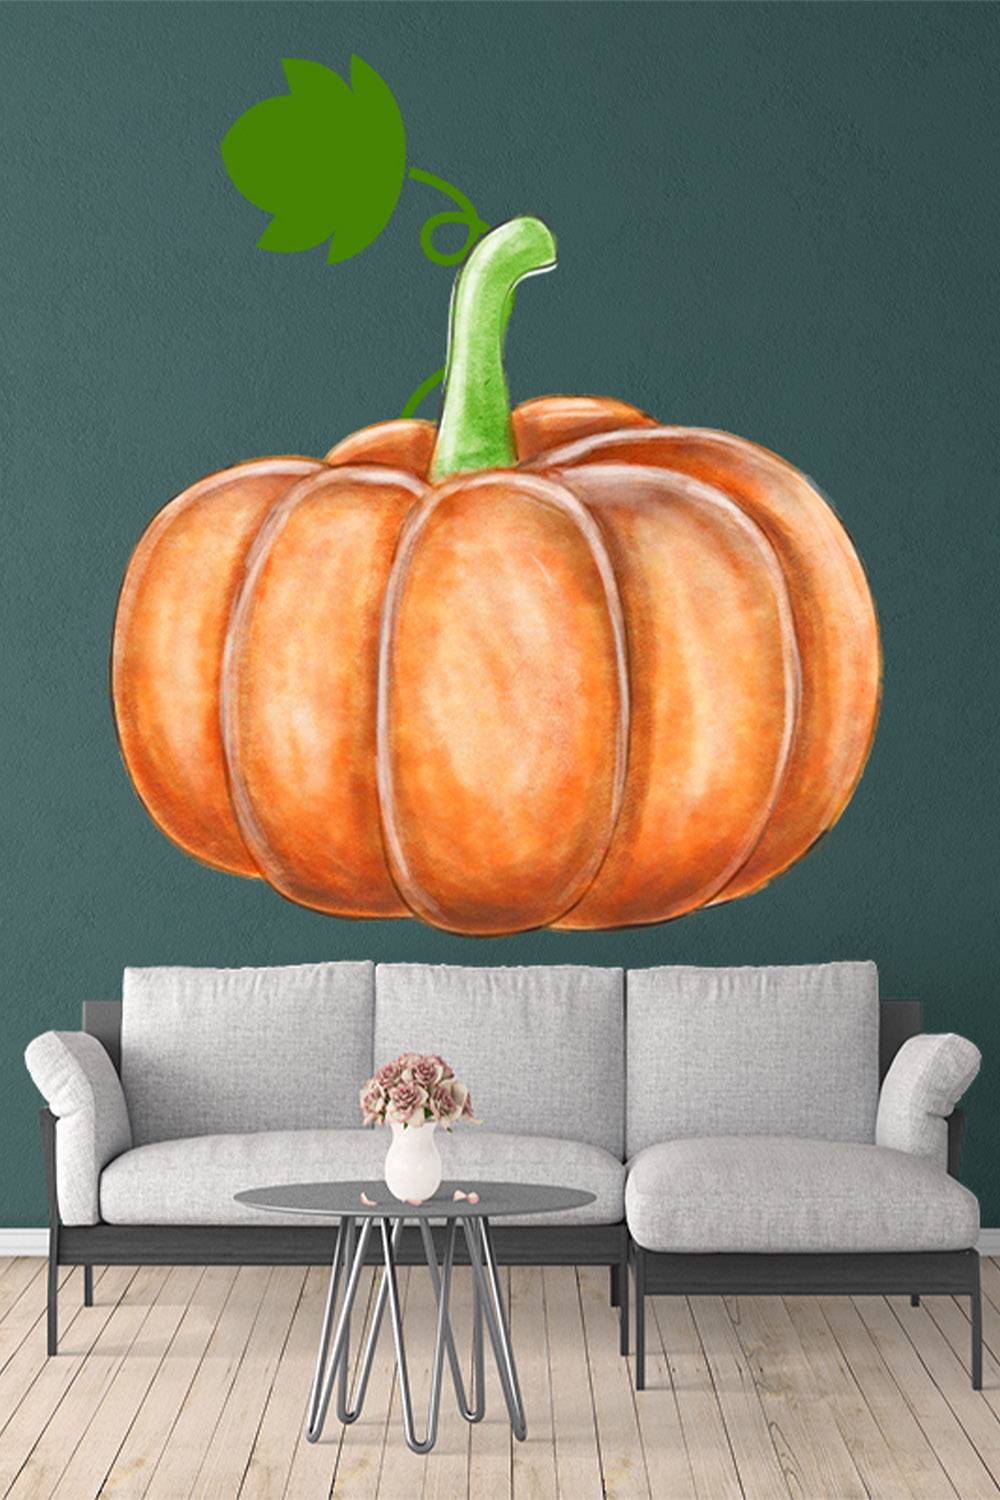 Enchanting image of a pumpkin on the wall